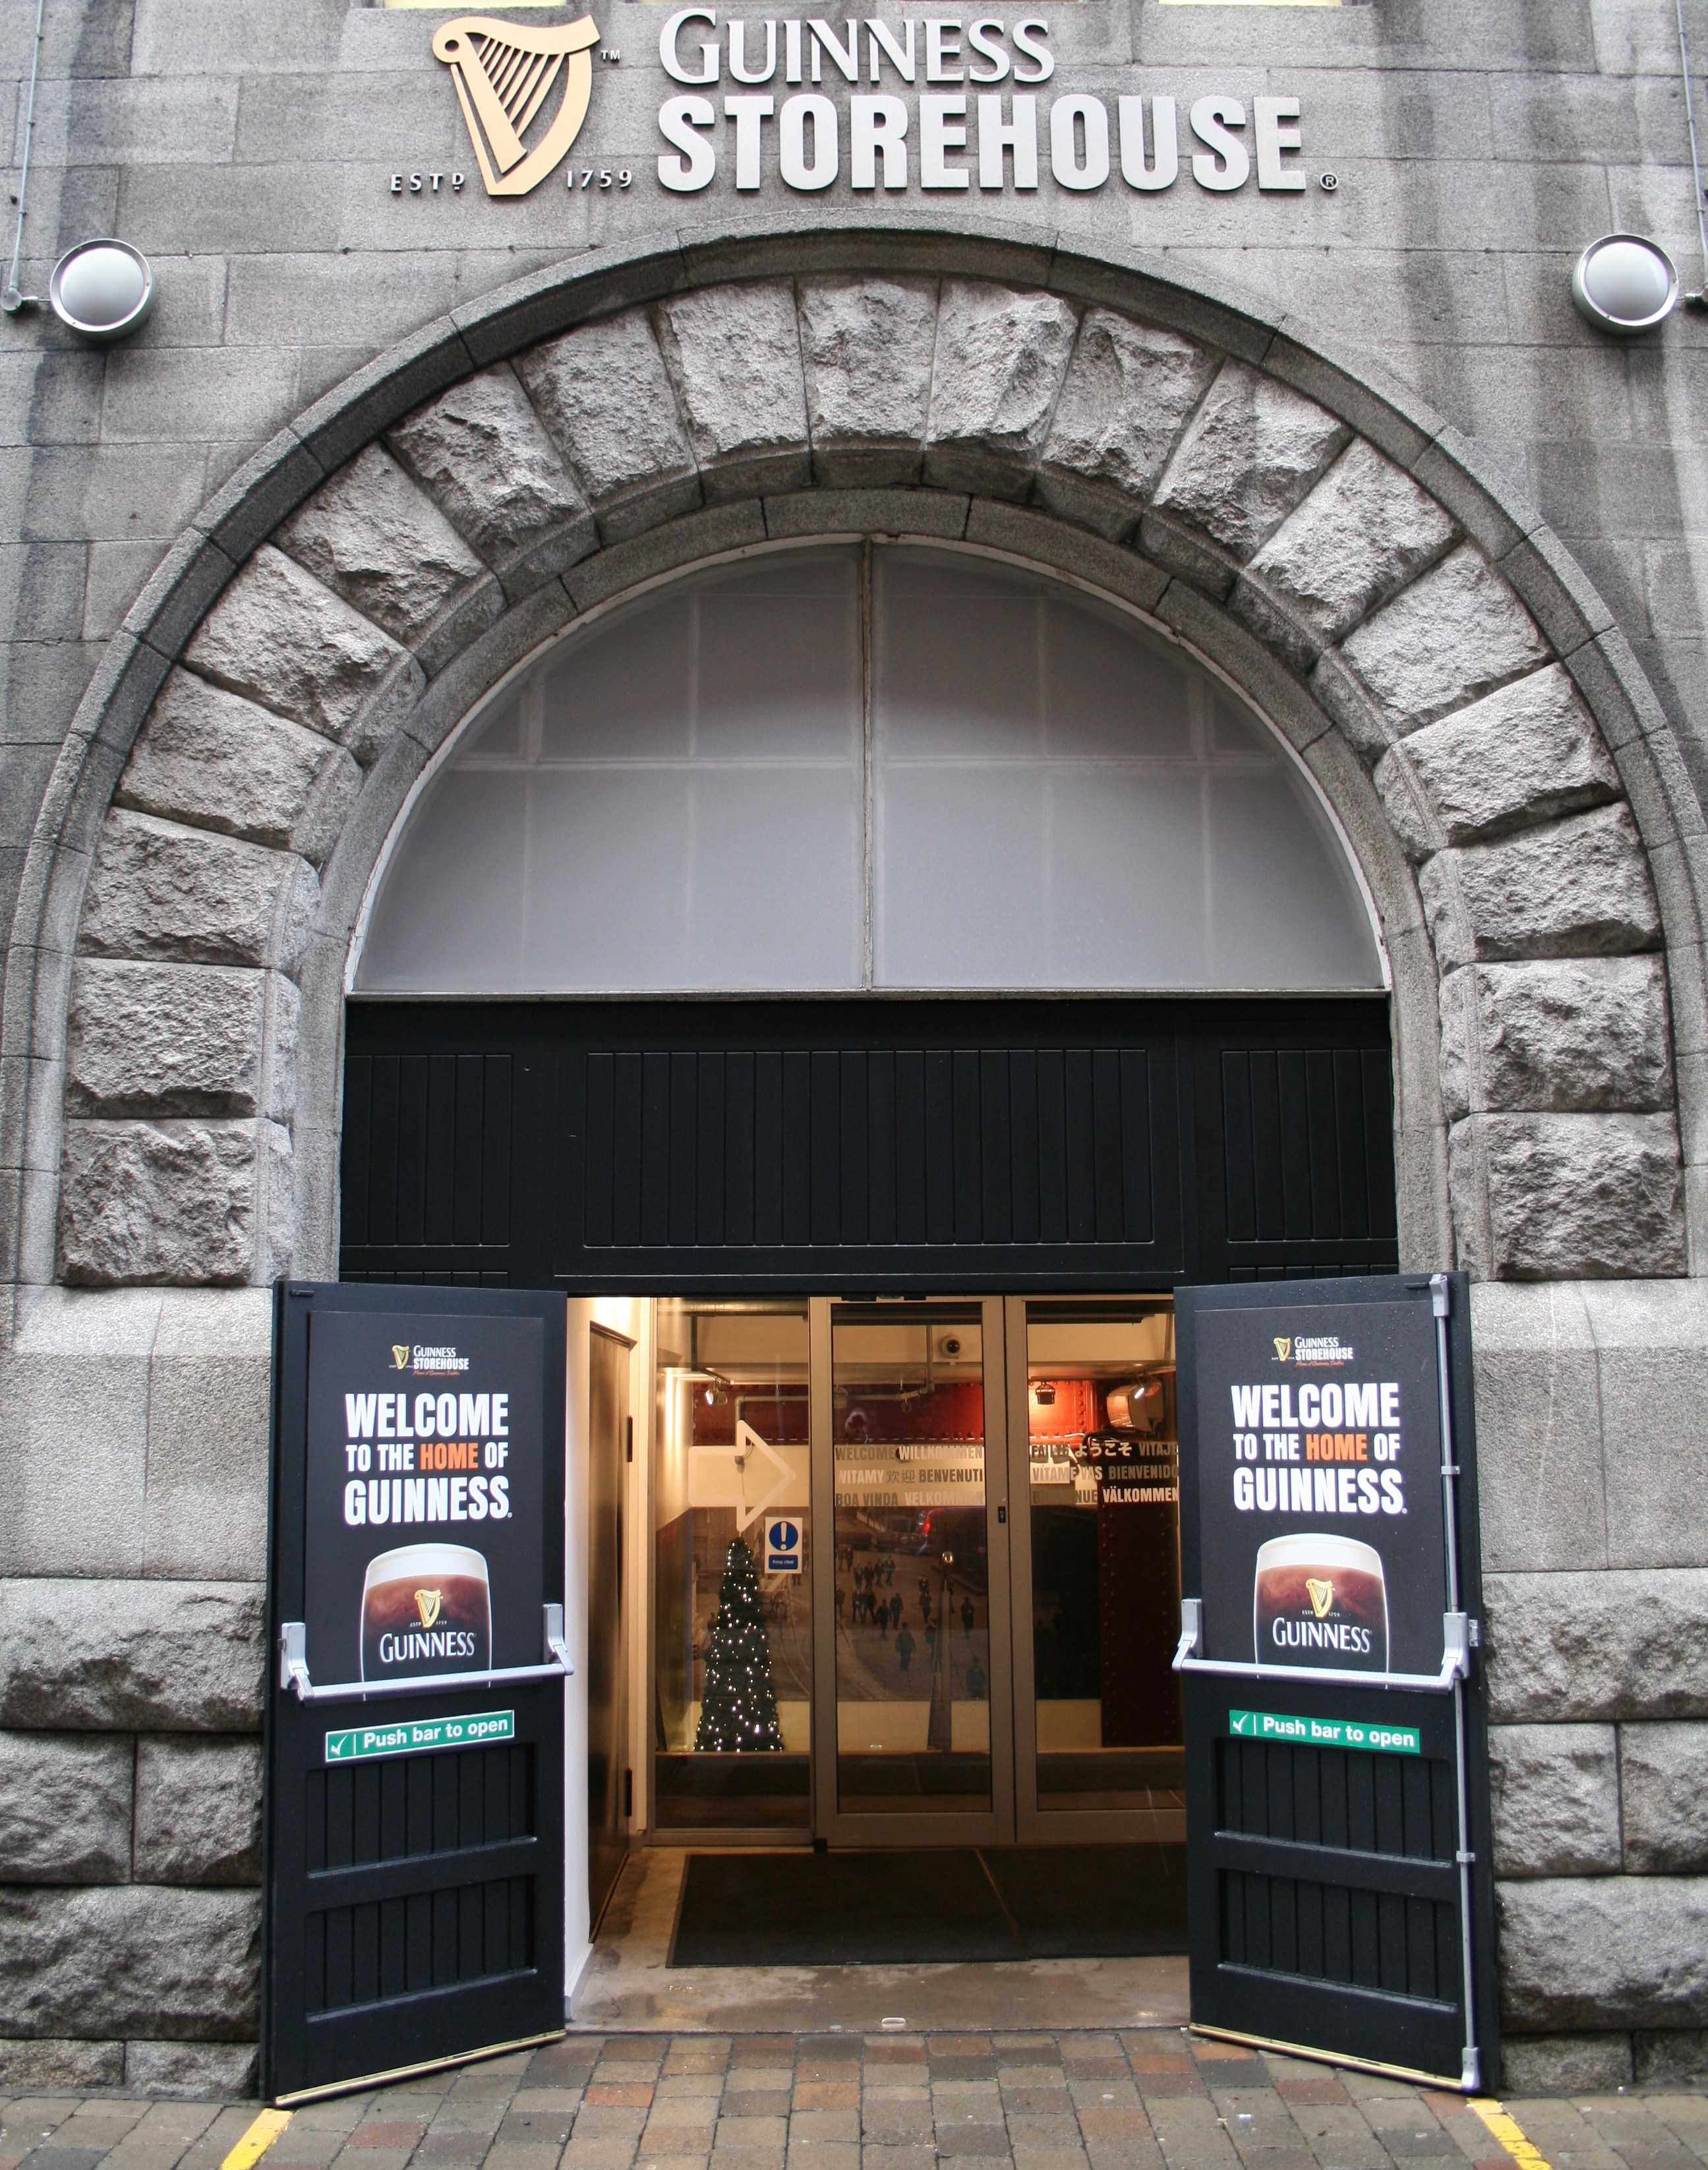 Guinness Storehouse Entrance that leads you into 7 floors of fun!